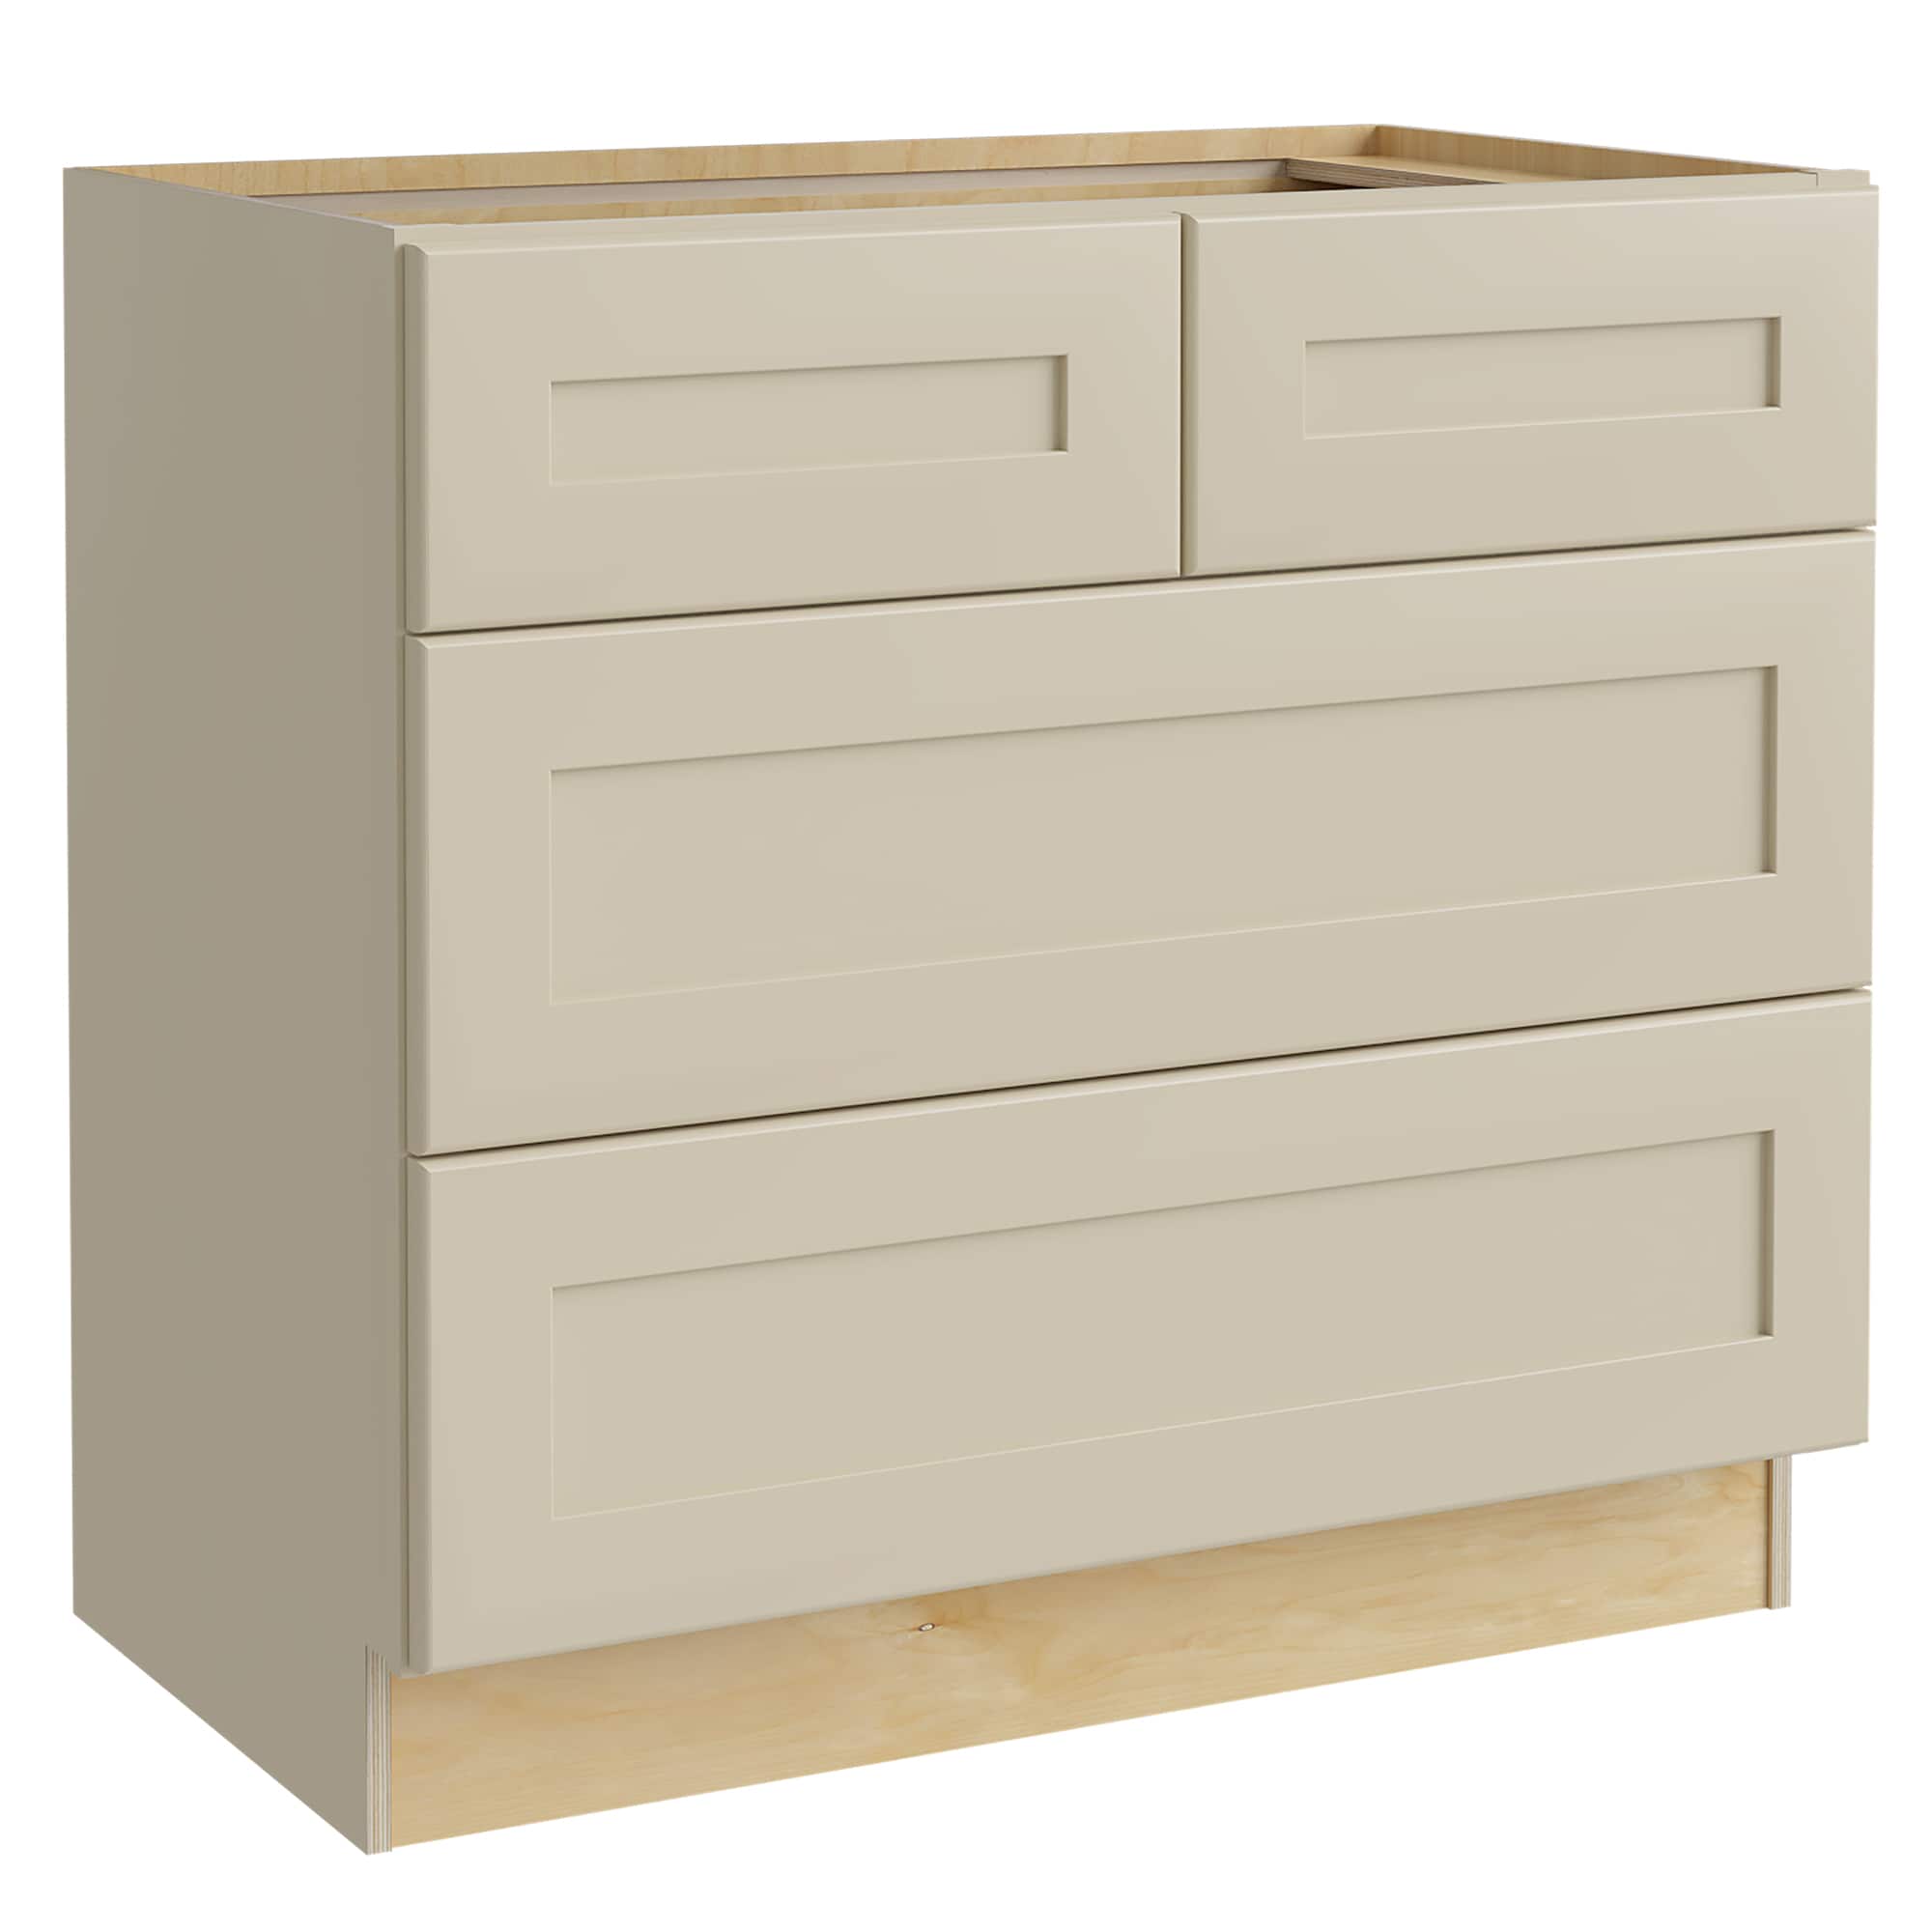 Luxxe Cabinetry 36-in W x 34.5-in H x 24-in D Norfolk Blended Cream Painted Drawer Base Fully Assembled Semi-custom Cabinet in Off-White | BCT36-NBC